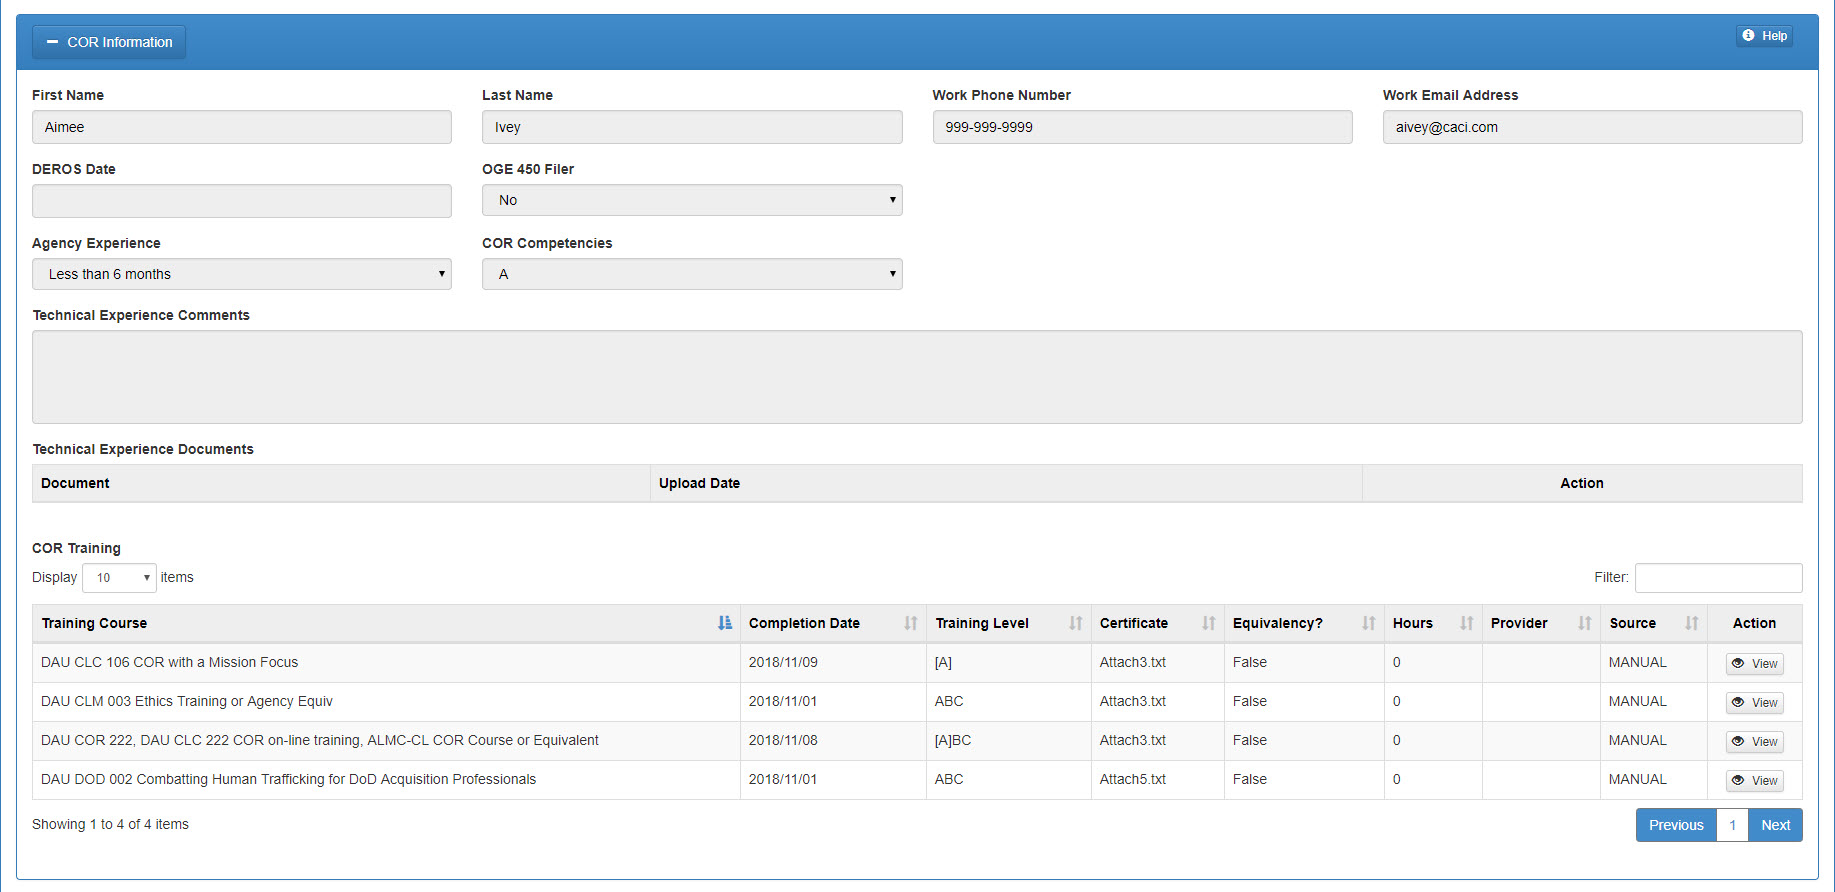 The image provides a preview of the COR Surveillance File Overview.